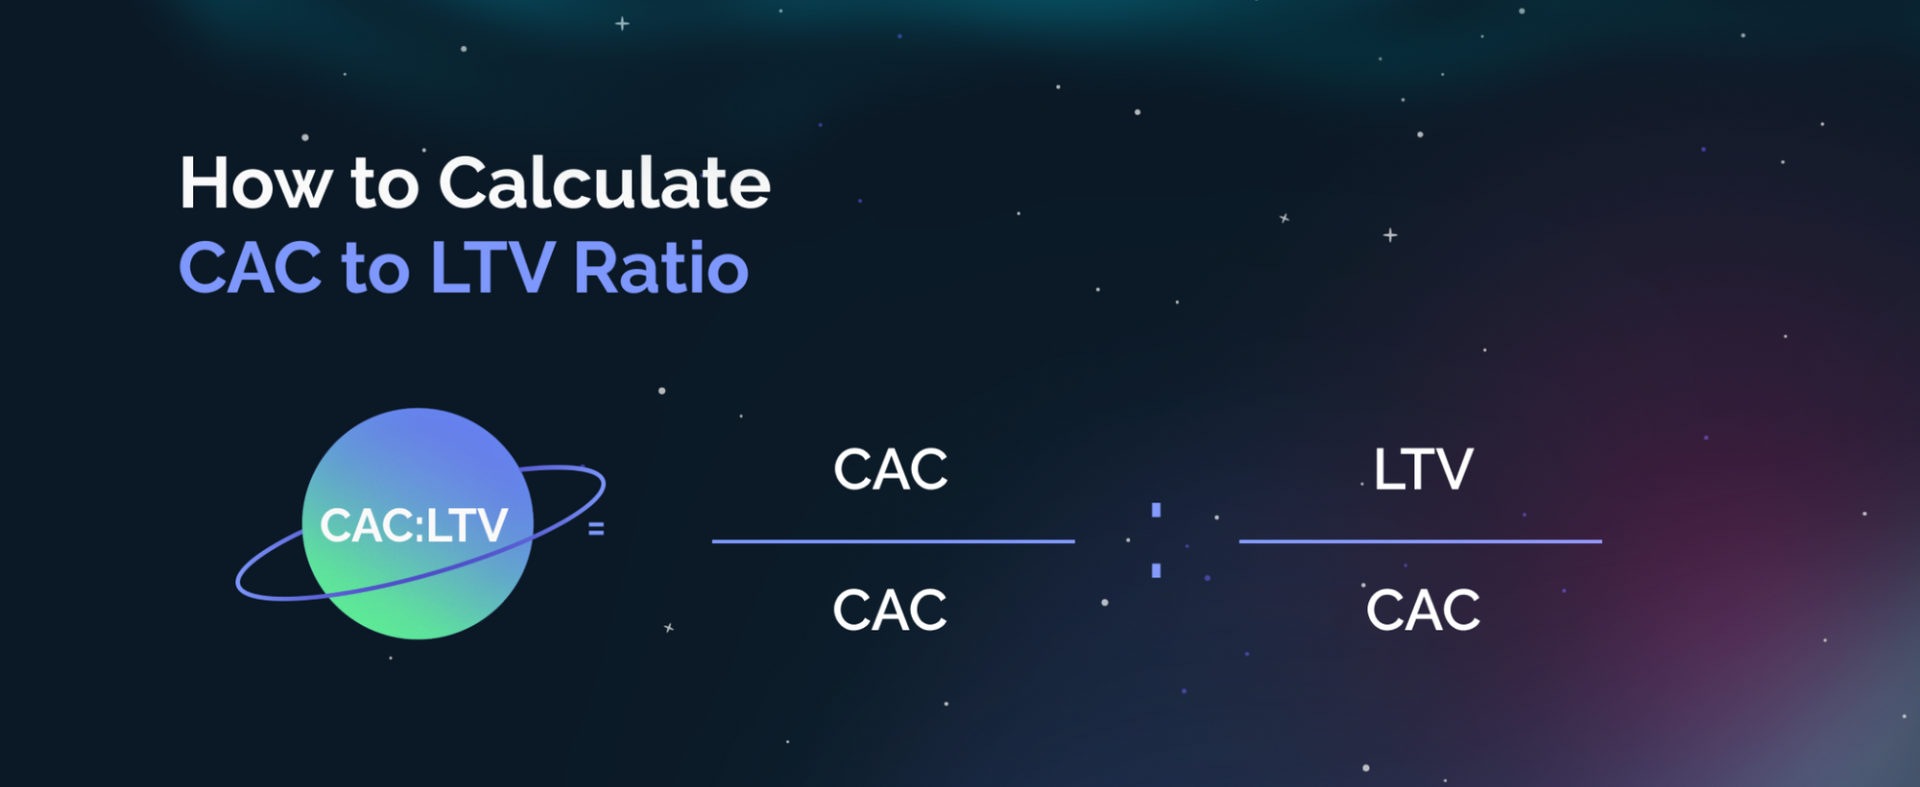 How to Calculate CAC to LTV Ratio